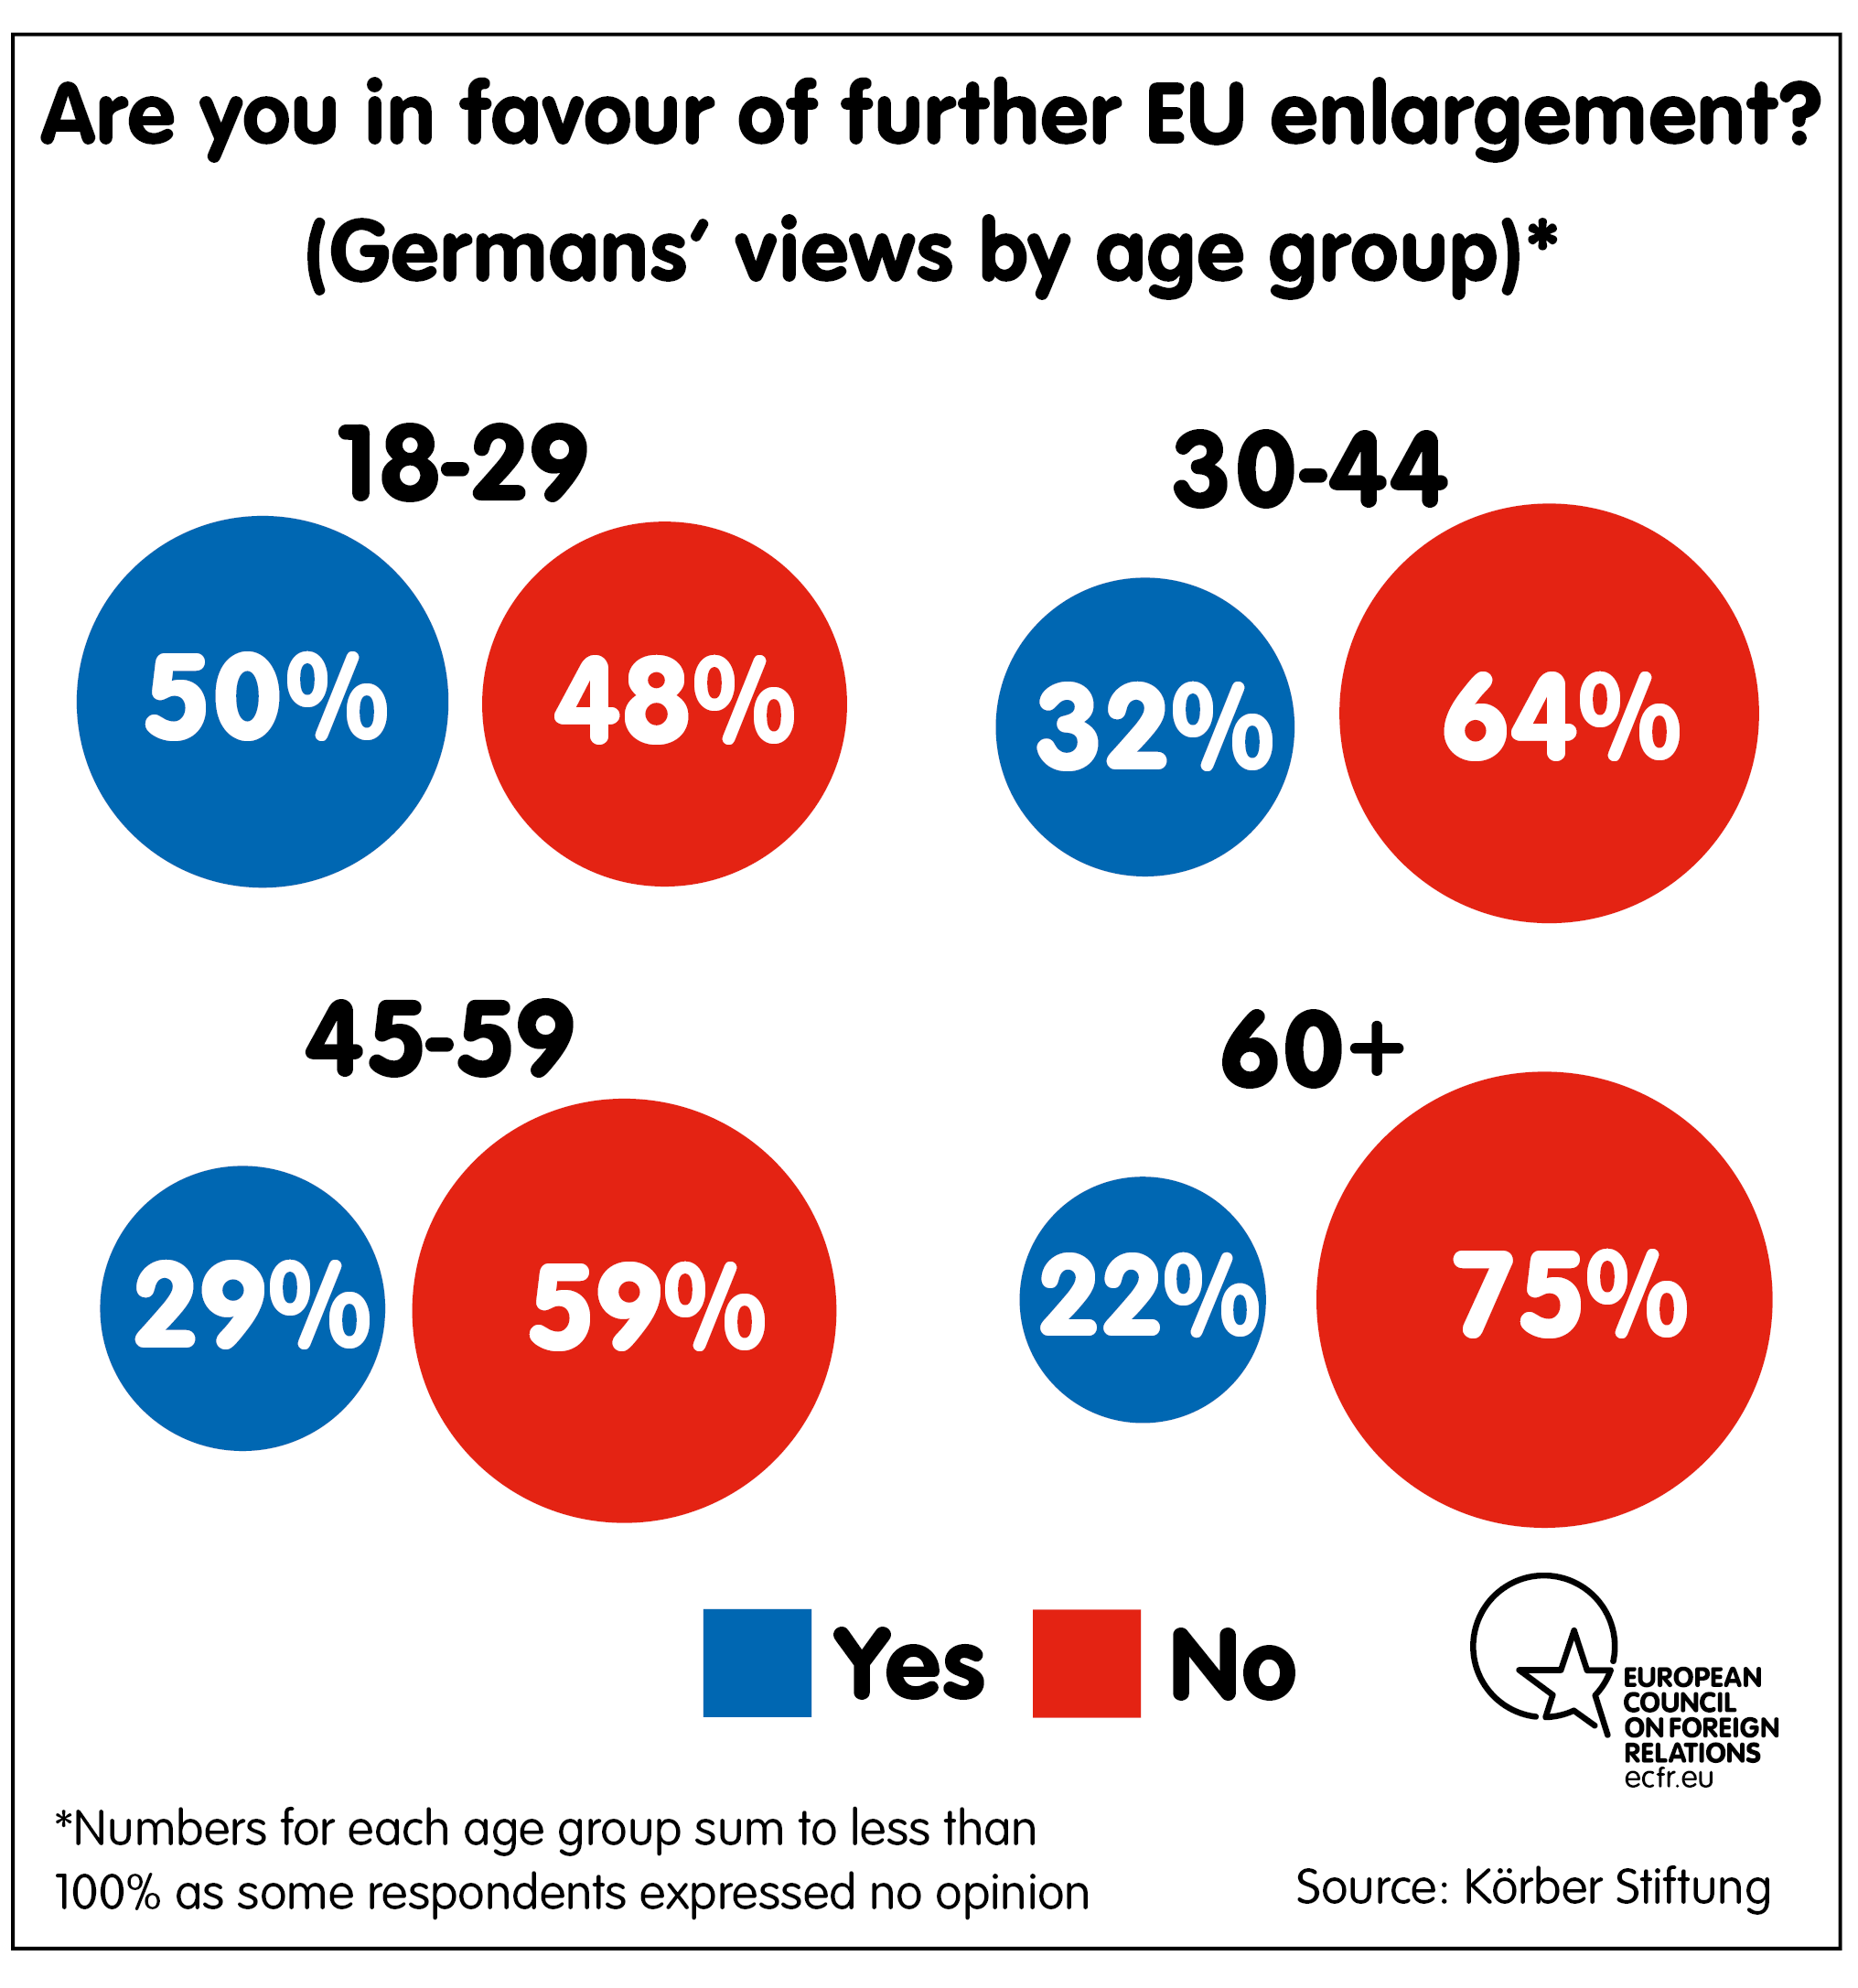 In favour of EU enlargment?